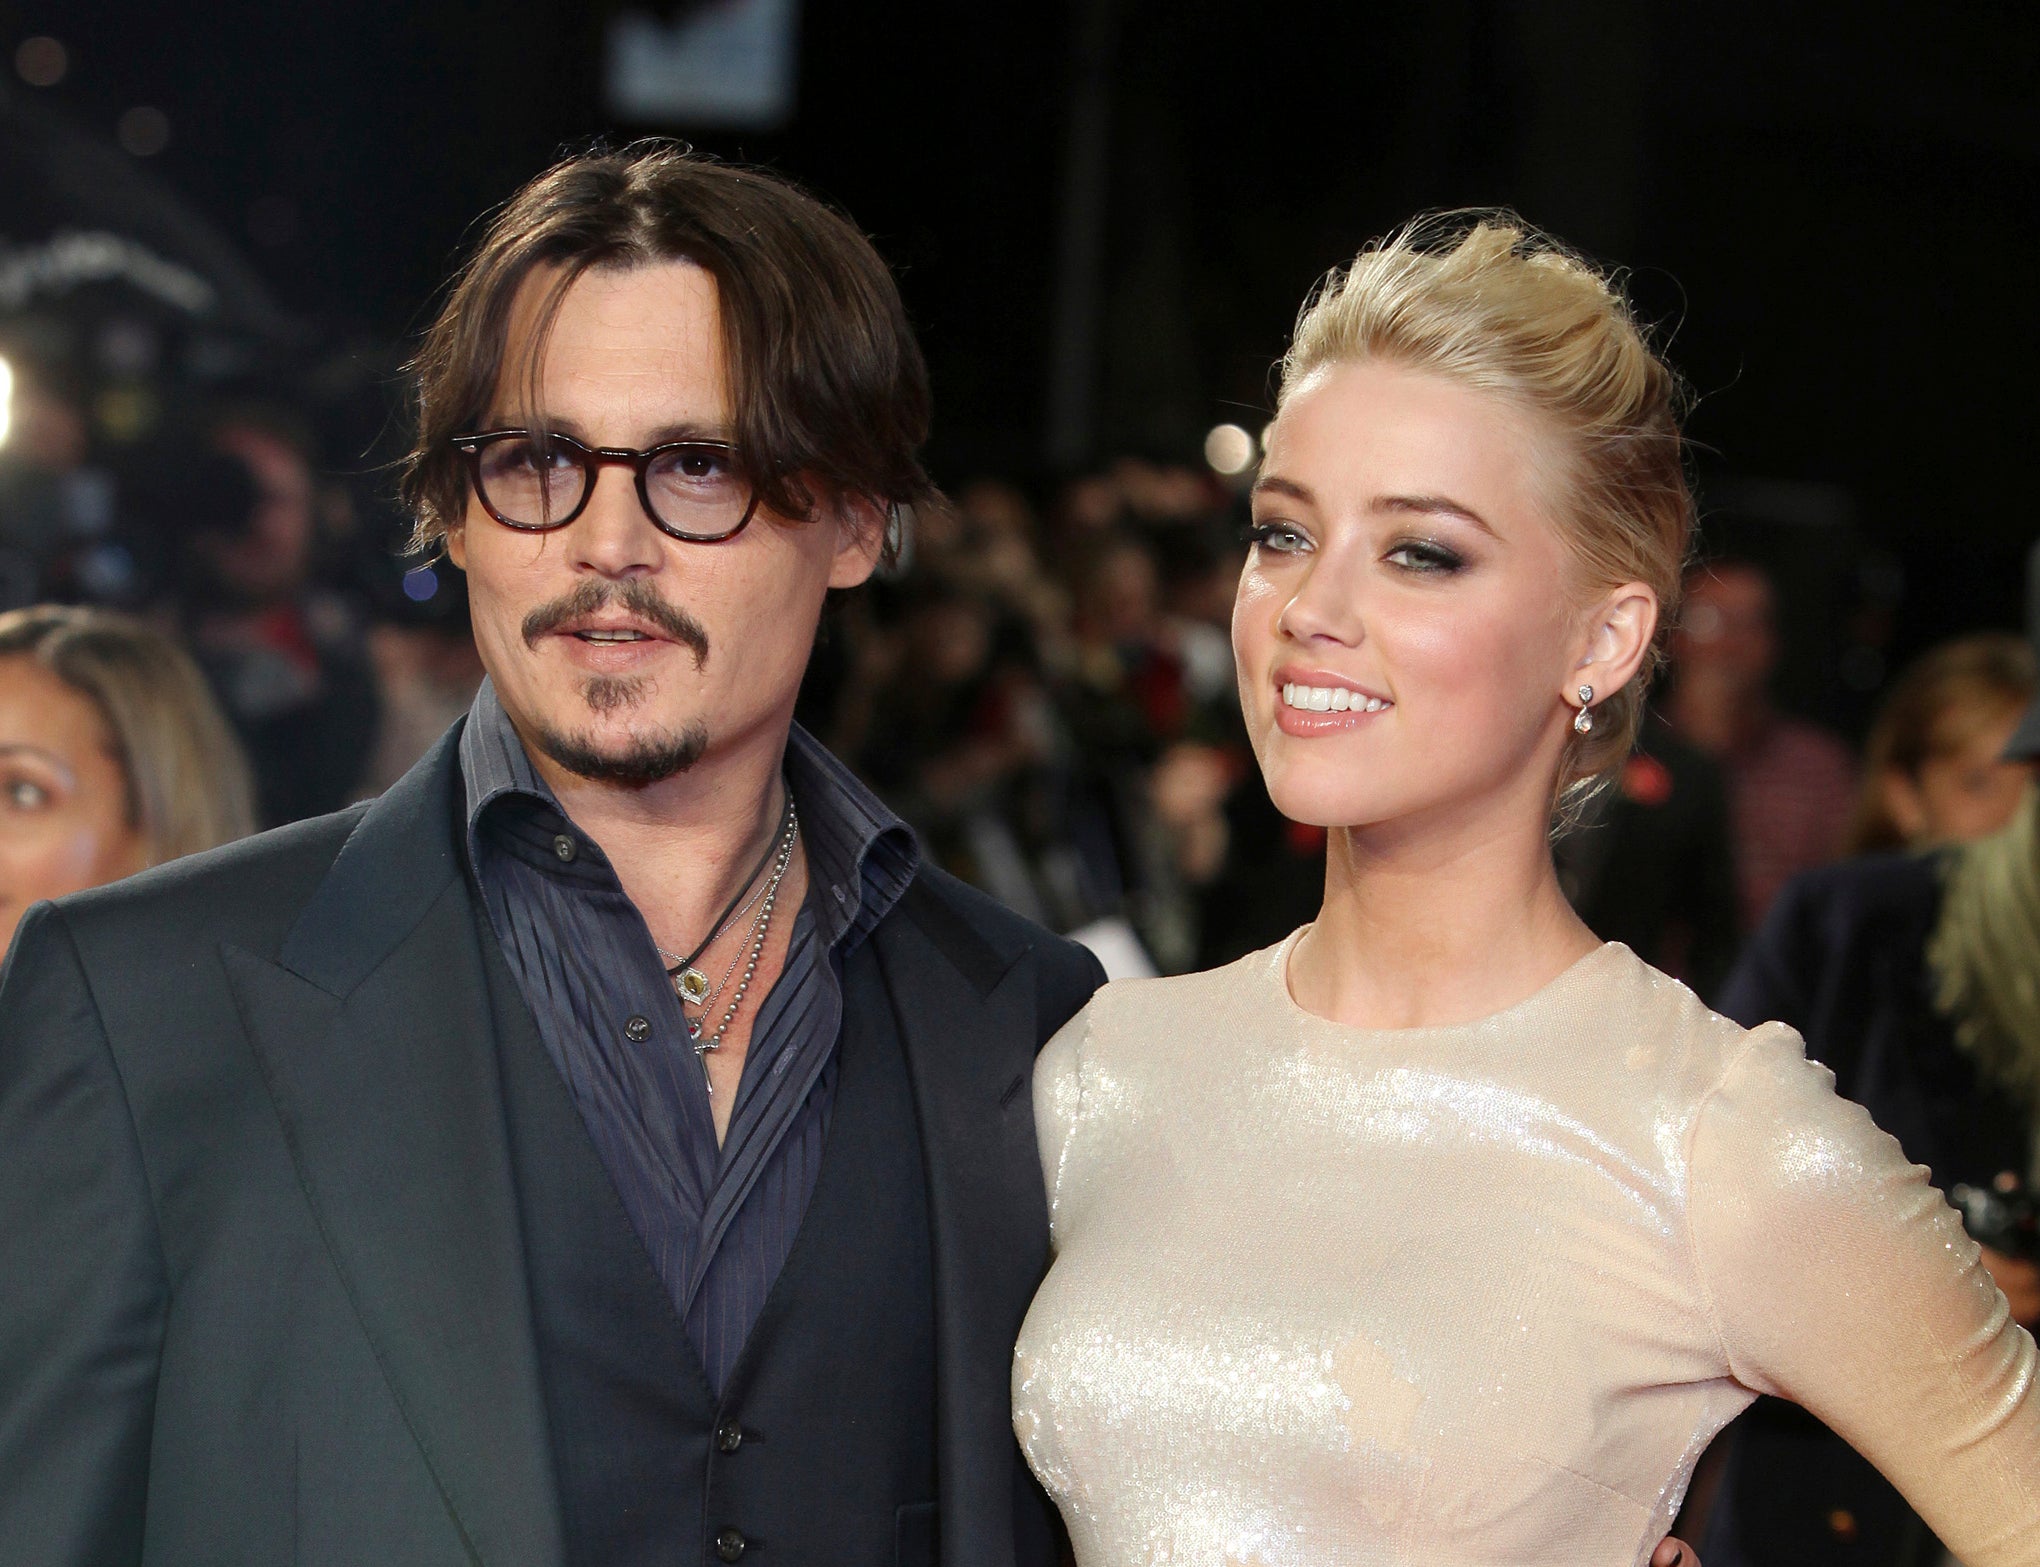 Johnny Depp and Amber Heard pictured together in 2011